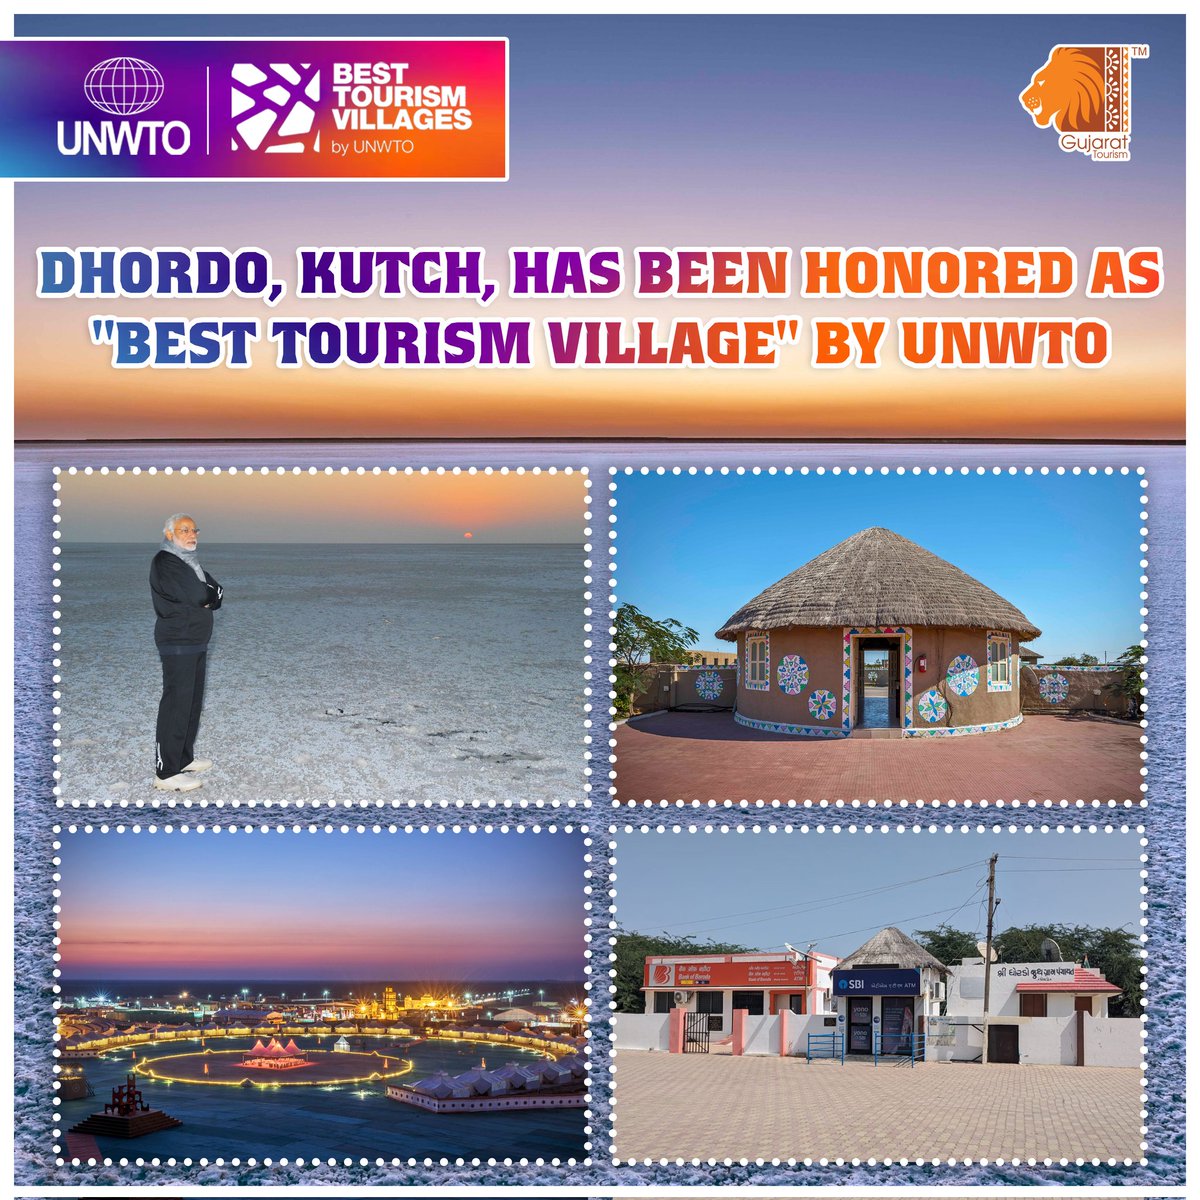 Dhordo, Kutch, has been honored as #BestTourismVillage by @UNWTO & shines as the sole Indian village to get this honor. Do not miss the chance to experience the magic of #Dhordo during Rann Utsav. What are you waiting for? Plan your visit now.

#BestTourismVillages #dhordo